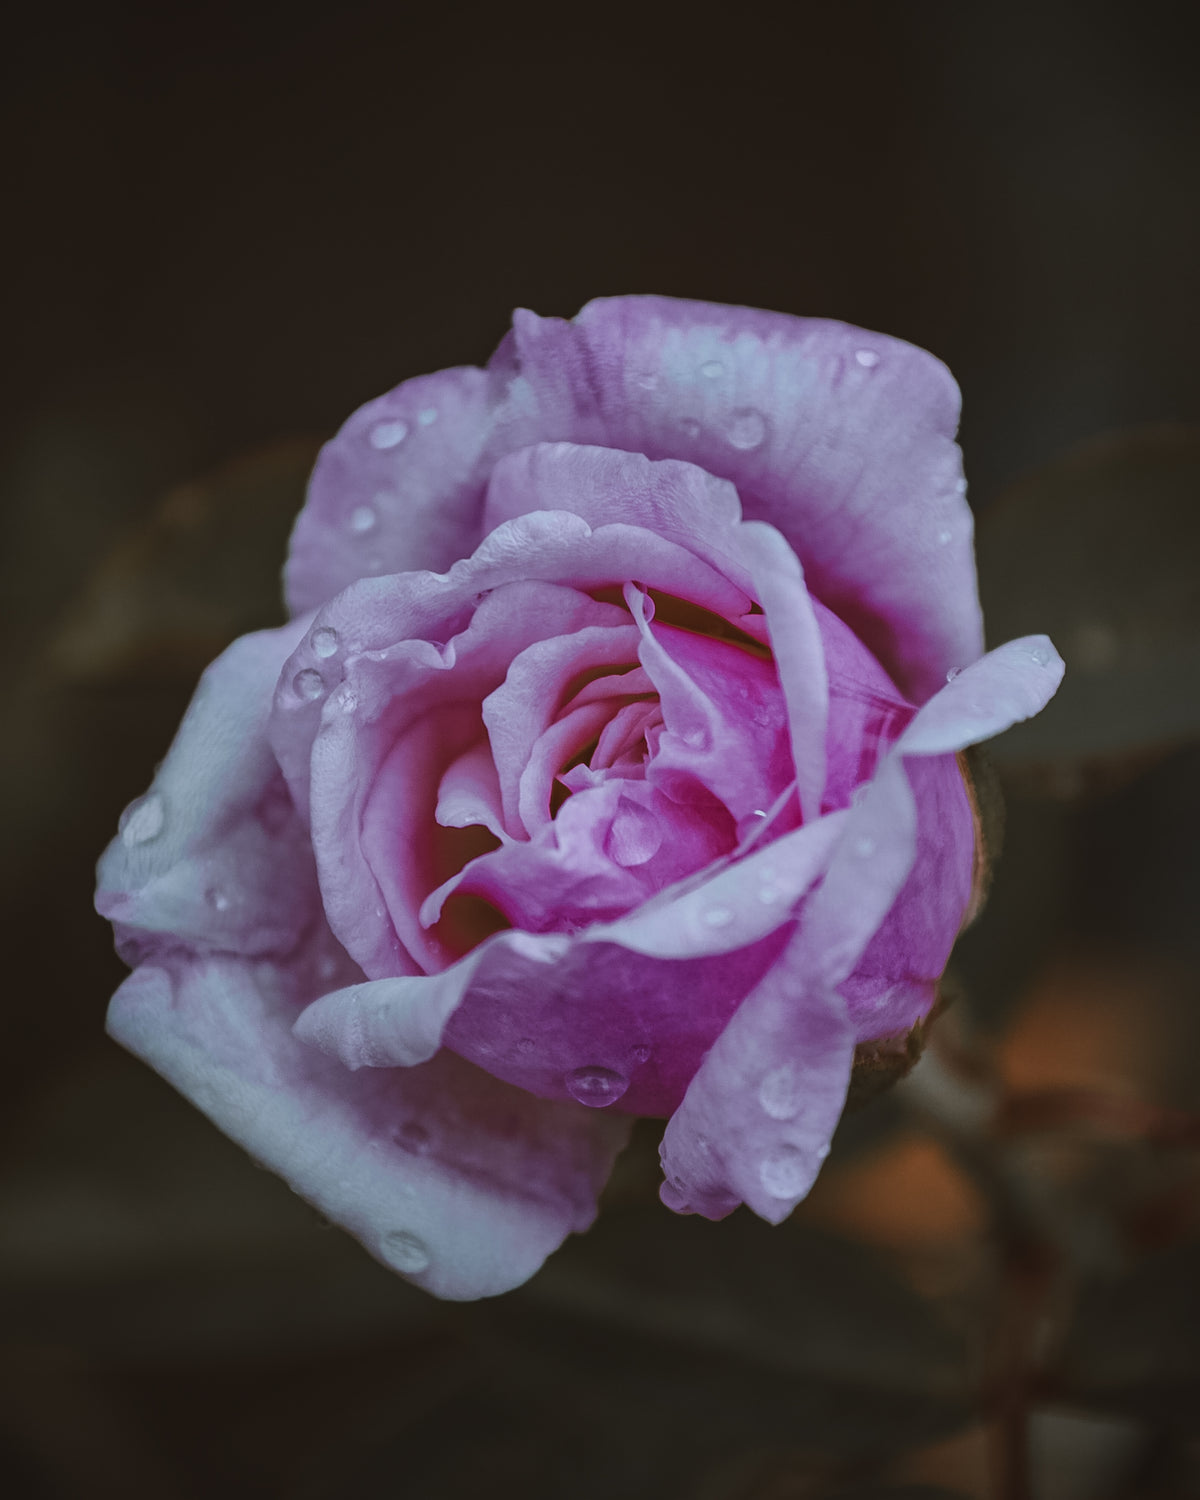 macro view of a wet pink rose with water droplets